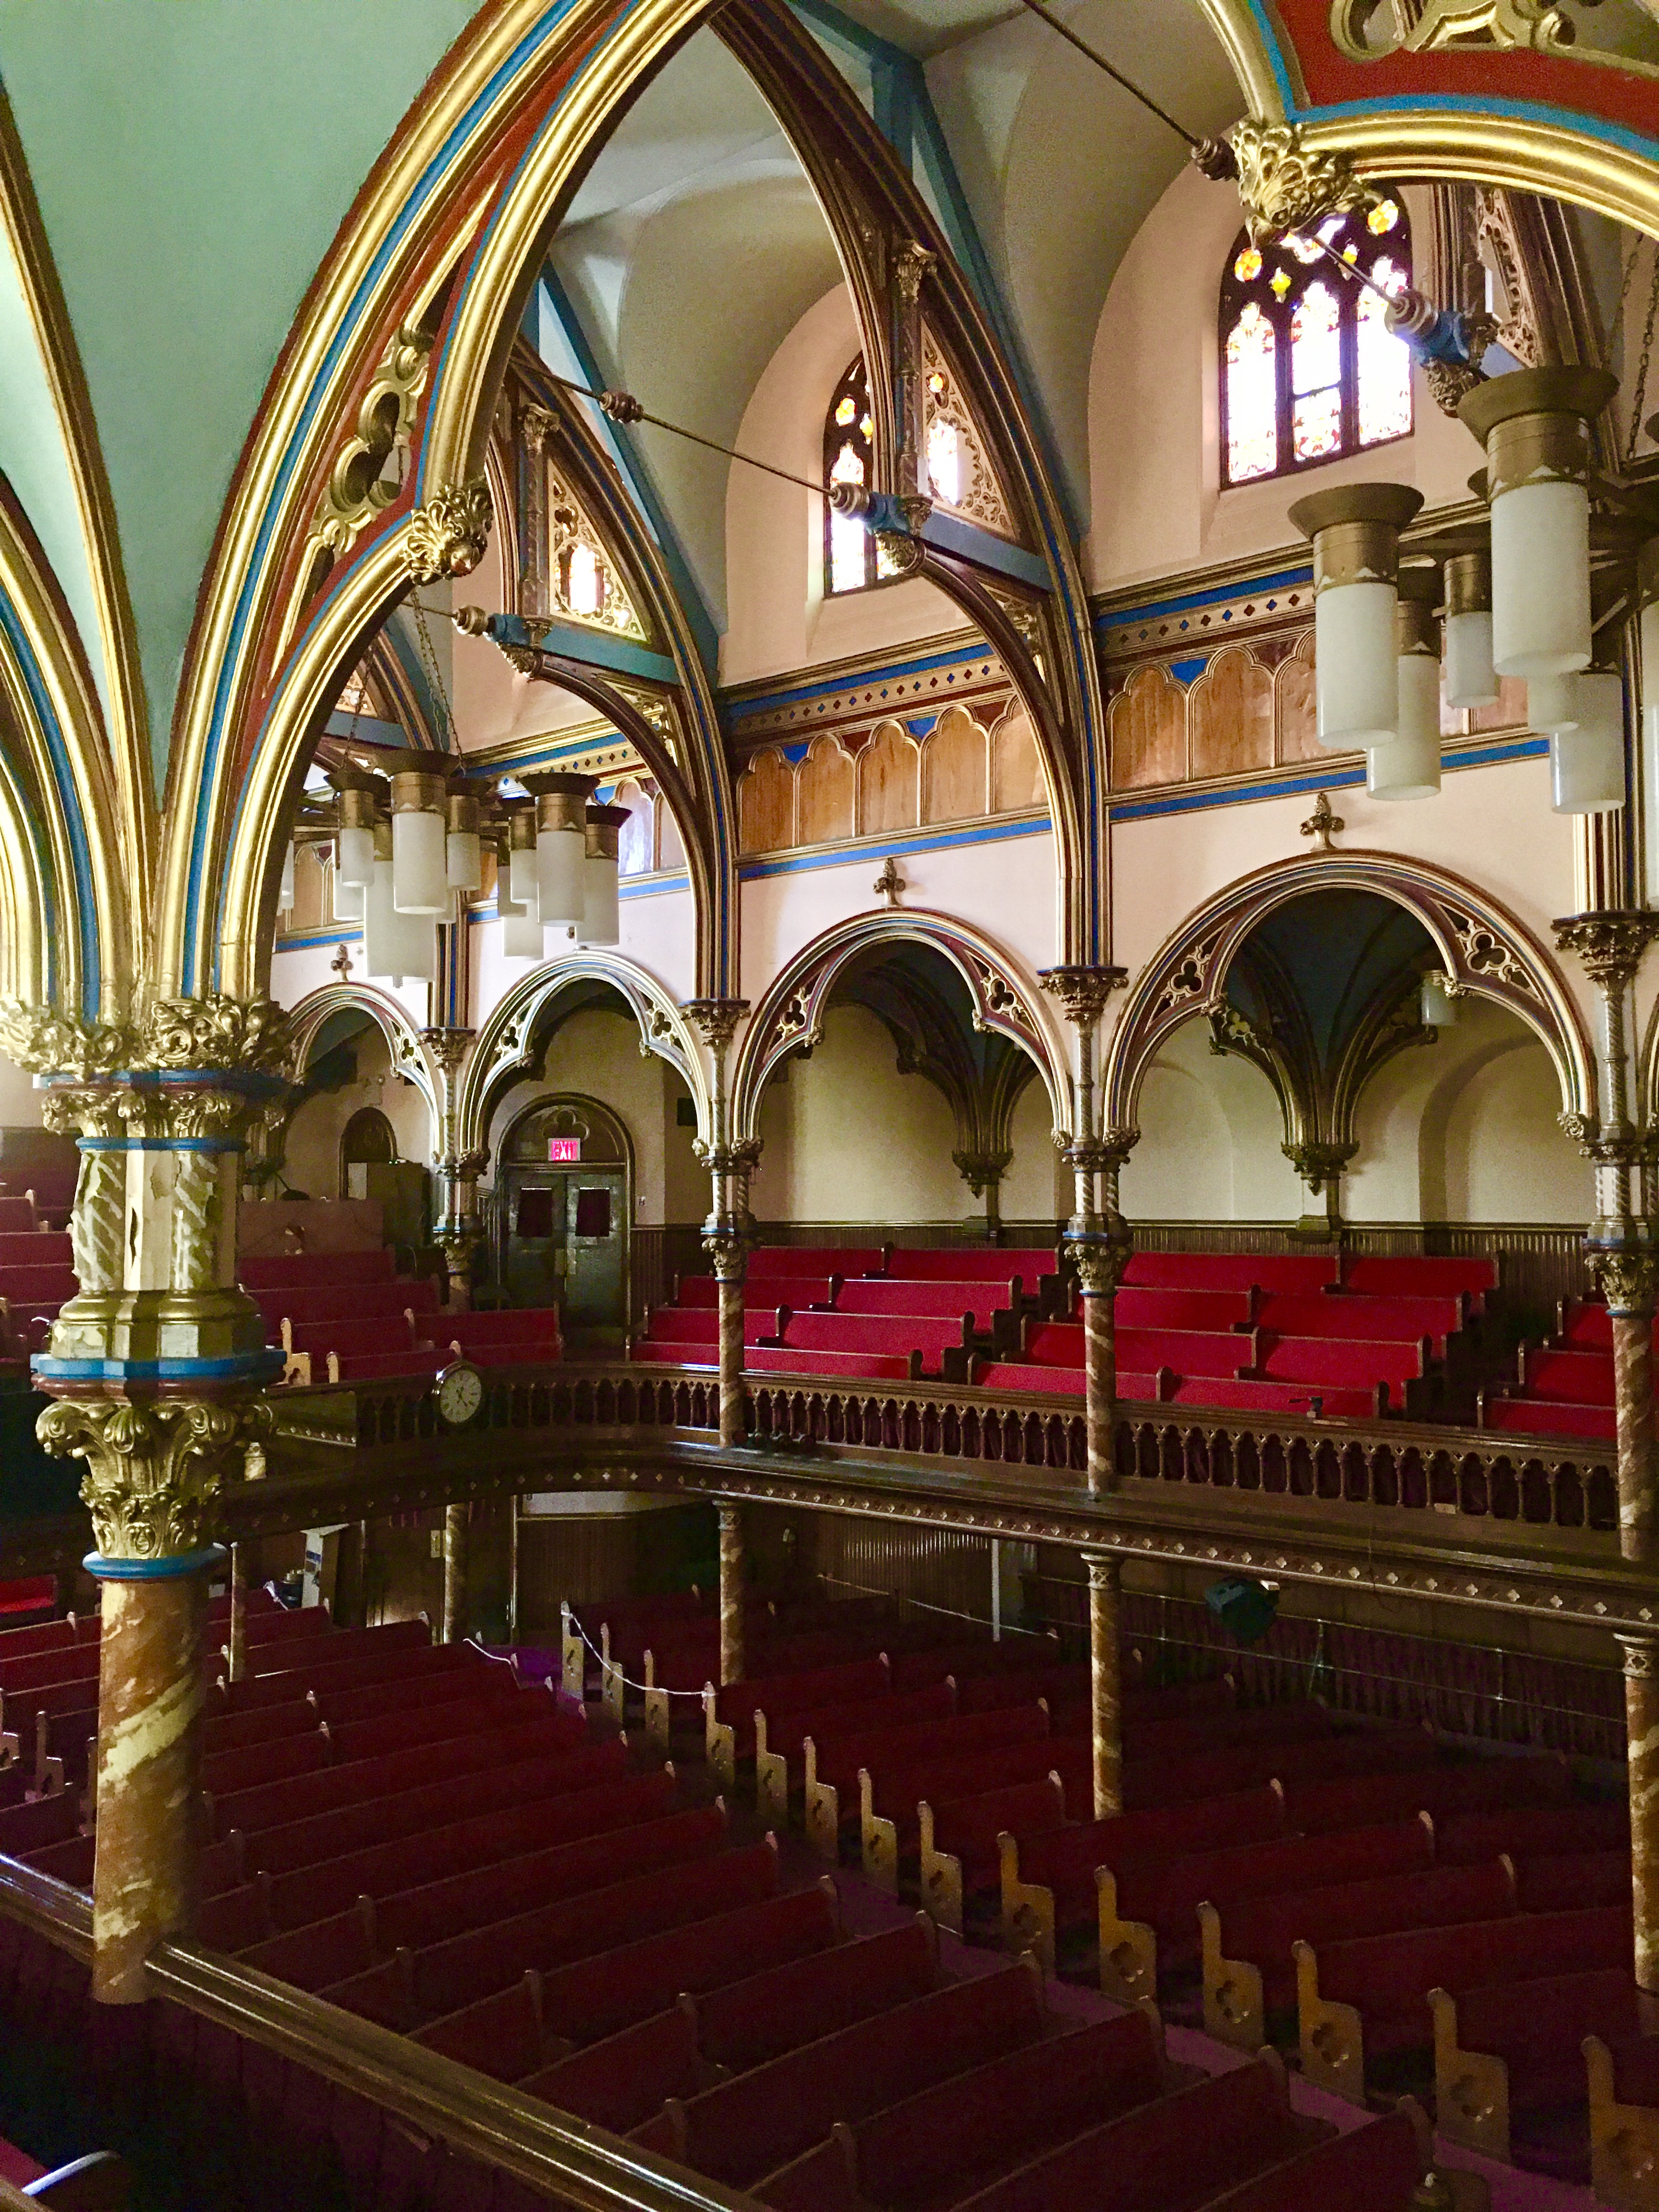 Cornerstone Baptist Church’s sanctuary is a thing of beauty. Photo: Lore Croghan/Brooklyn Eagle